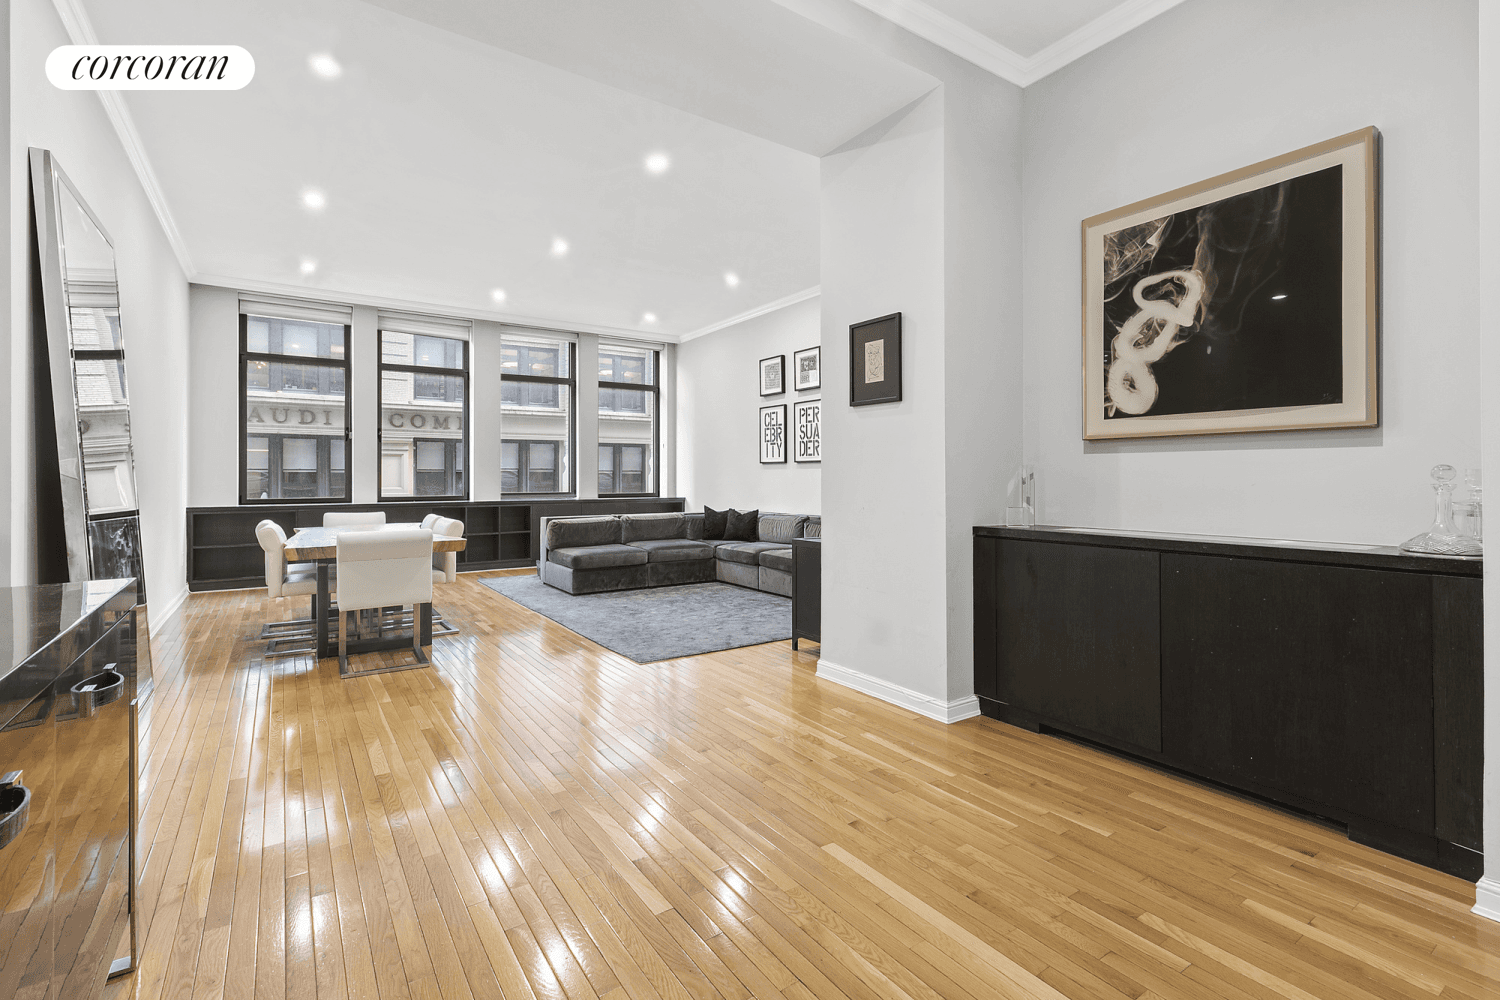 Ultra Exclusive Chelsea Condo A loft like condo in Chelsea's most desirable building, this 1, 531 square foot two bedroom, two bathroom apartment features hardwood floors, 11 foot ceilings, and ...